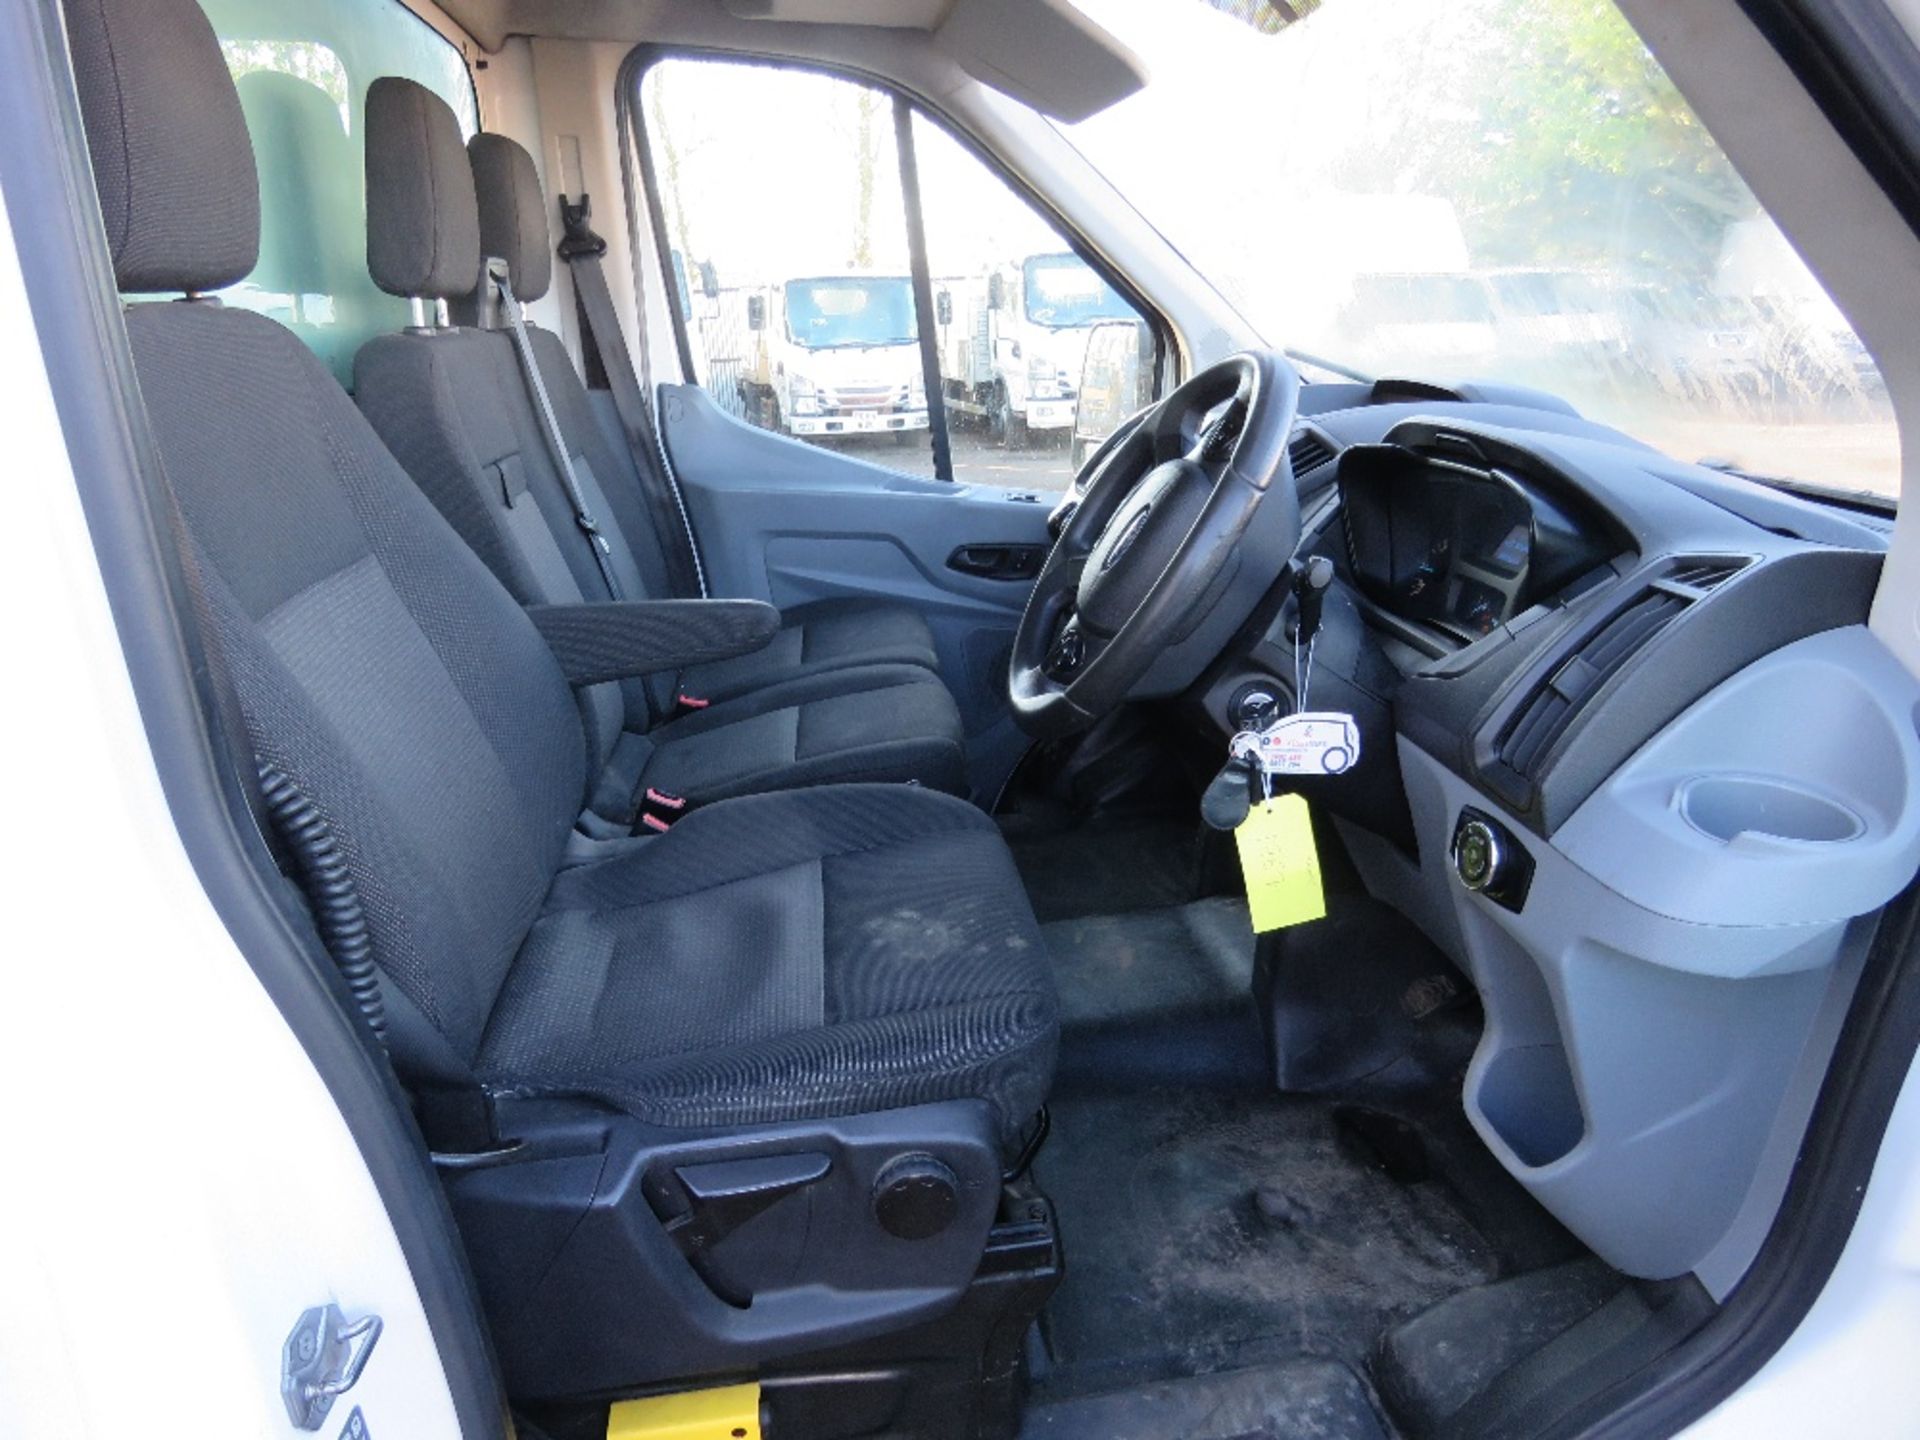 FORD TRANSIT TIPPER TRUCK WITH TOOL STORAGE LOCKER REG:BF65 GMZ. WITH V5 AND MOT UNTIL15.04.25. FIRS - Image 16 of 17